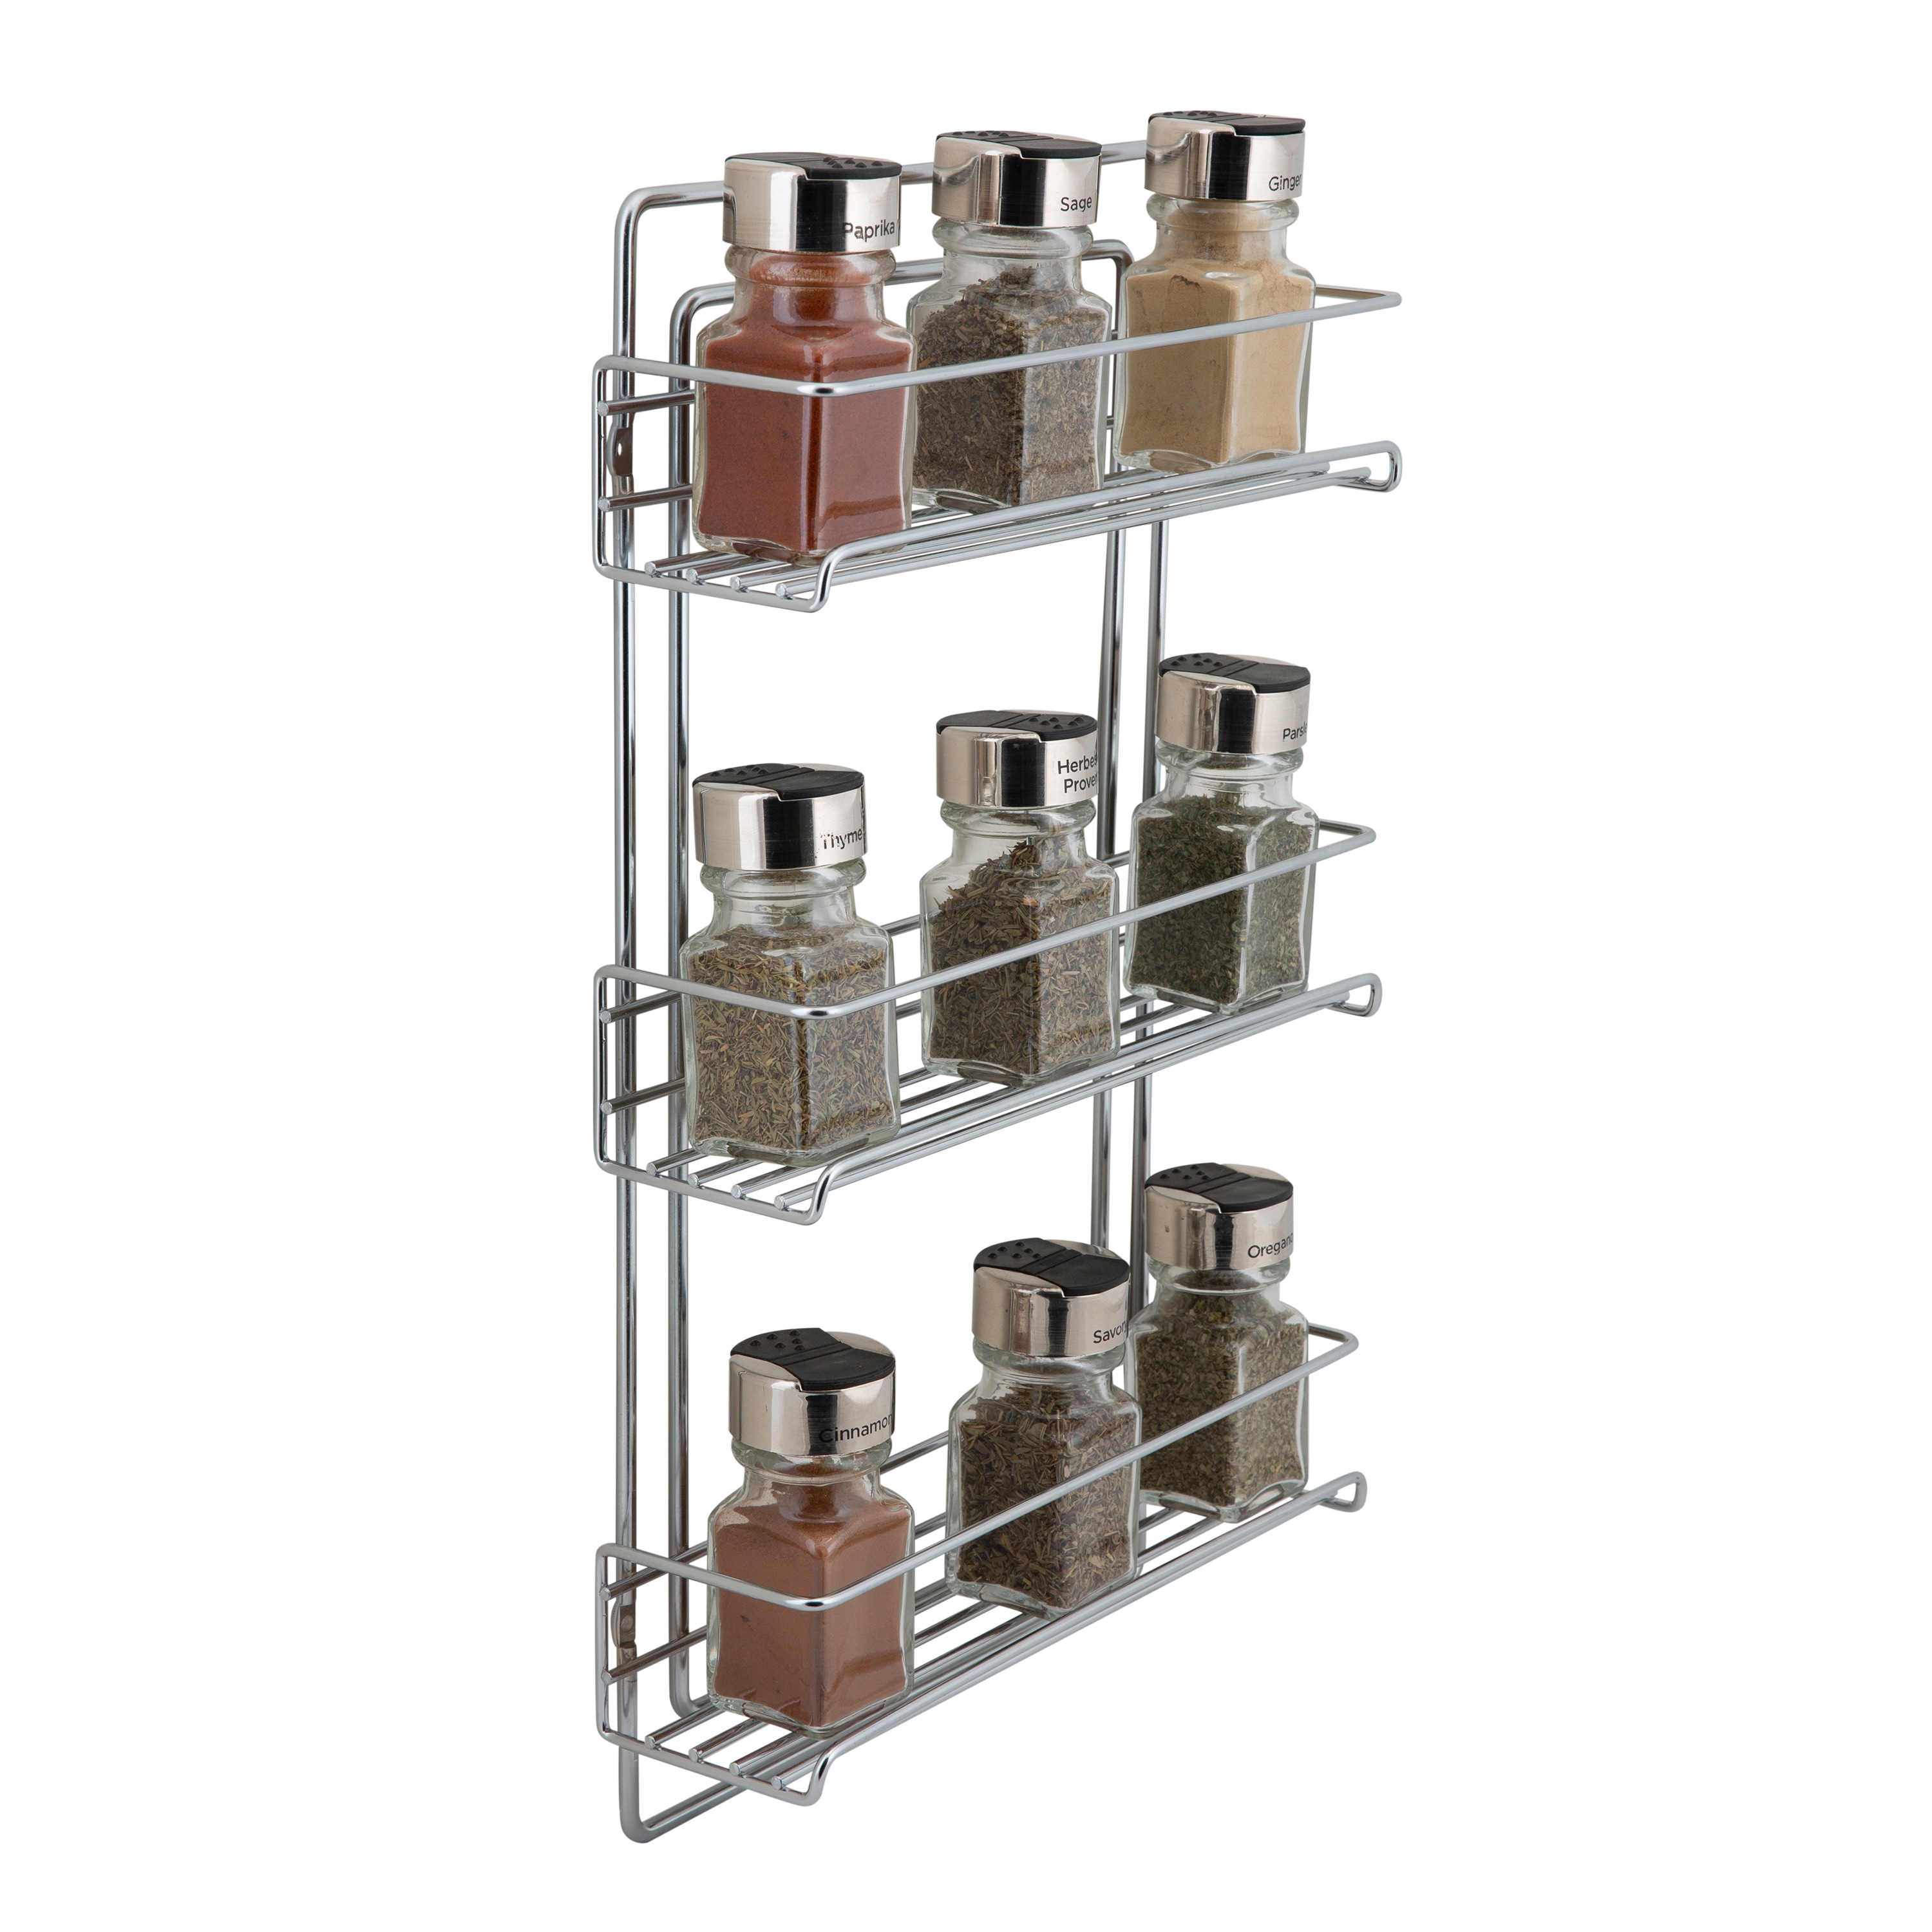 Free Standing Spice Rack